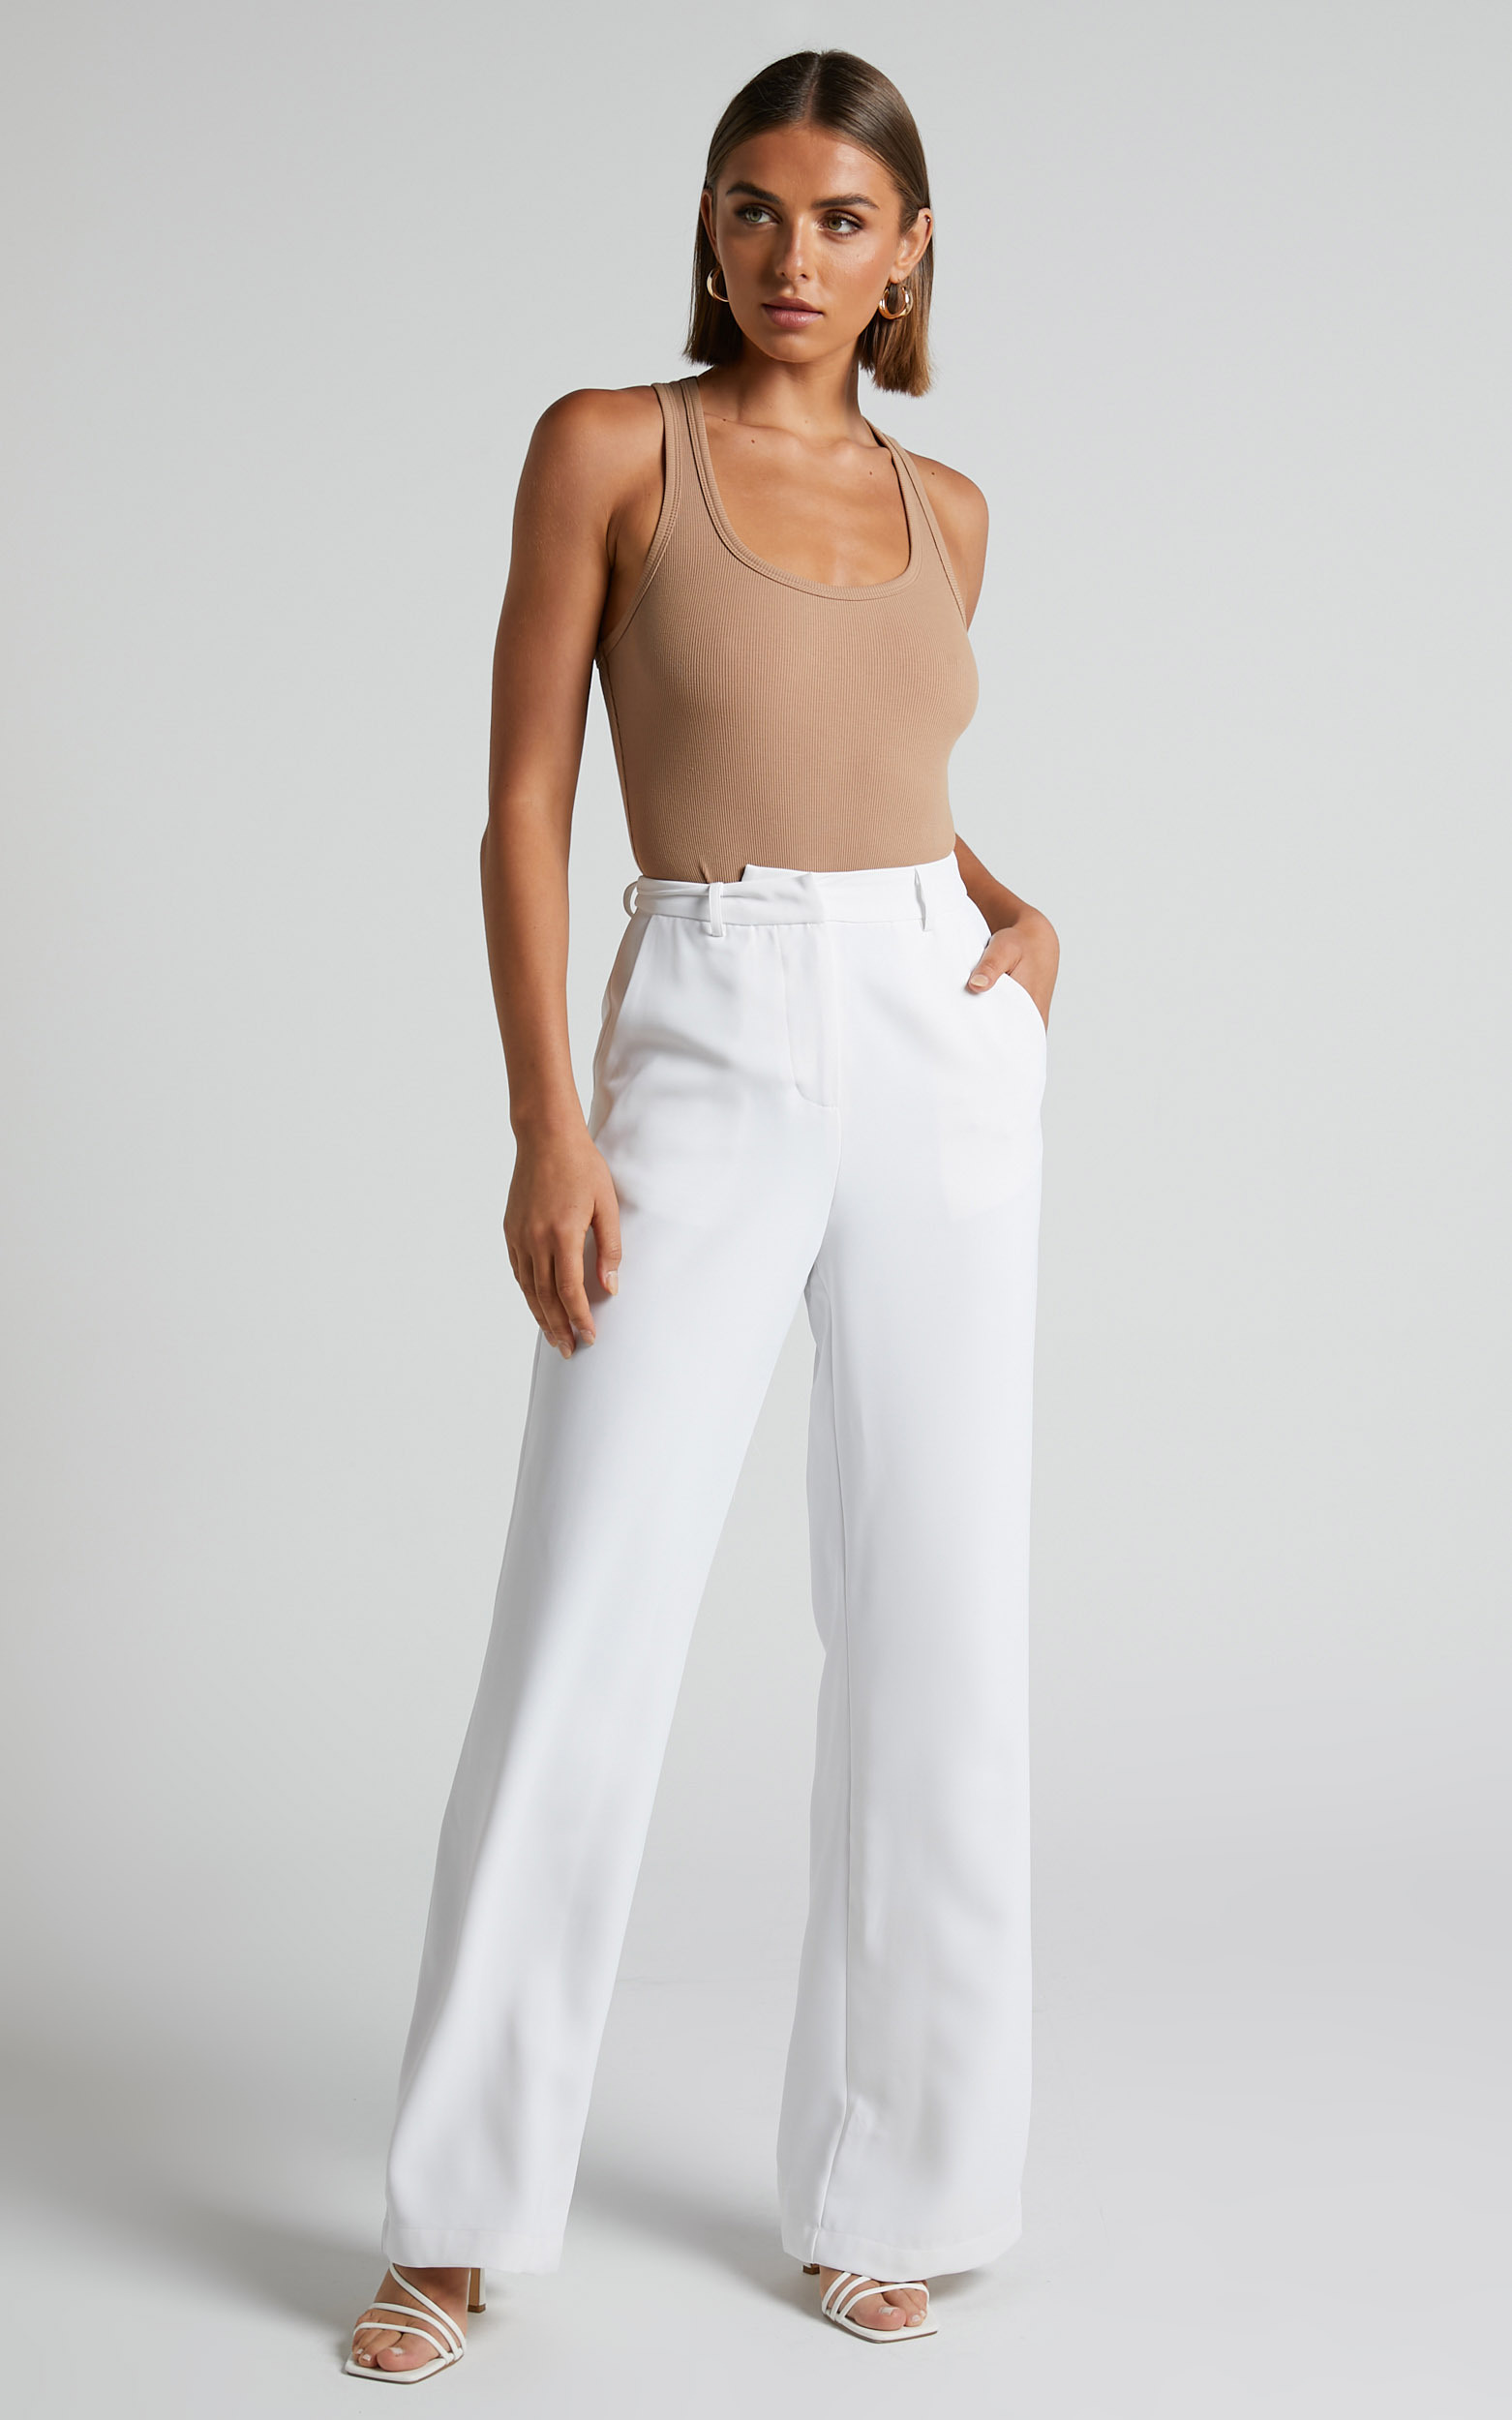 Bonnie Tailored Wide Leg Pants in White - 06, WHT5, hi-res image number null